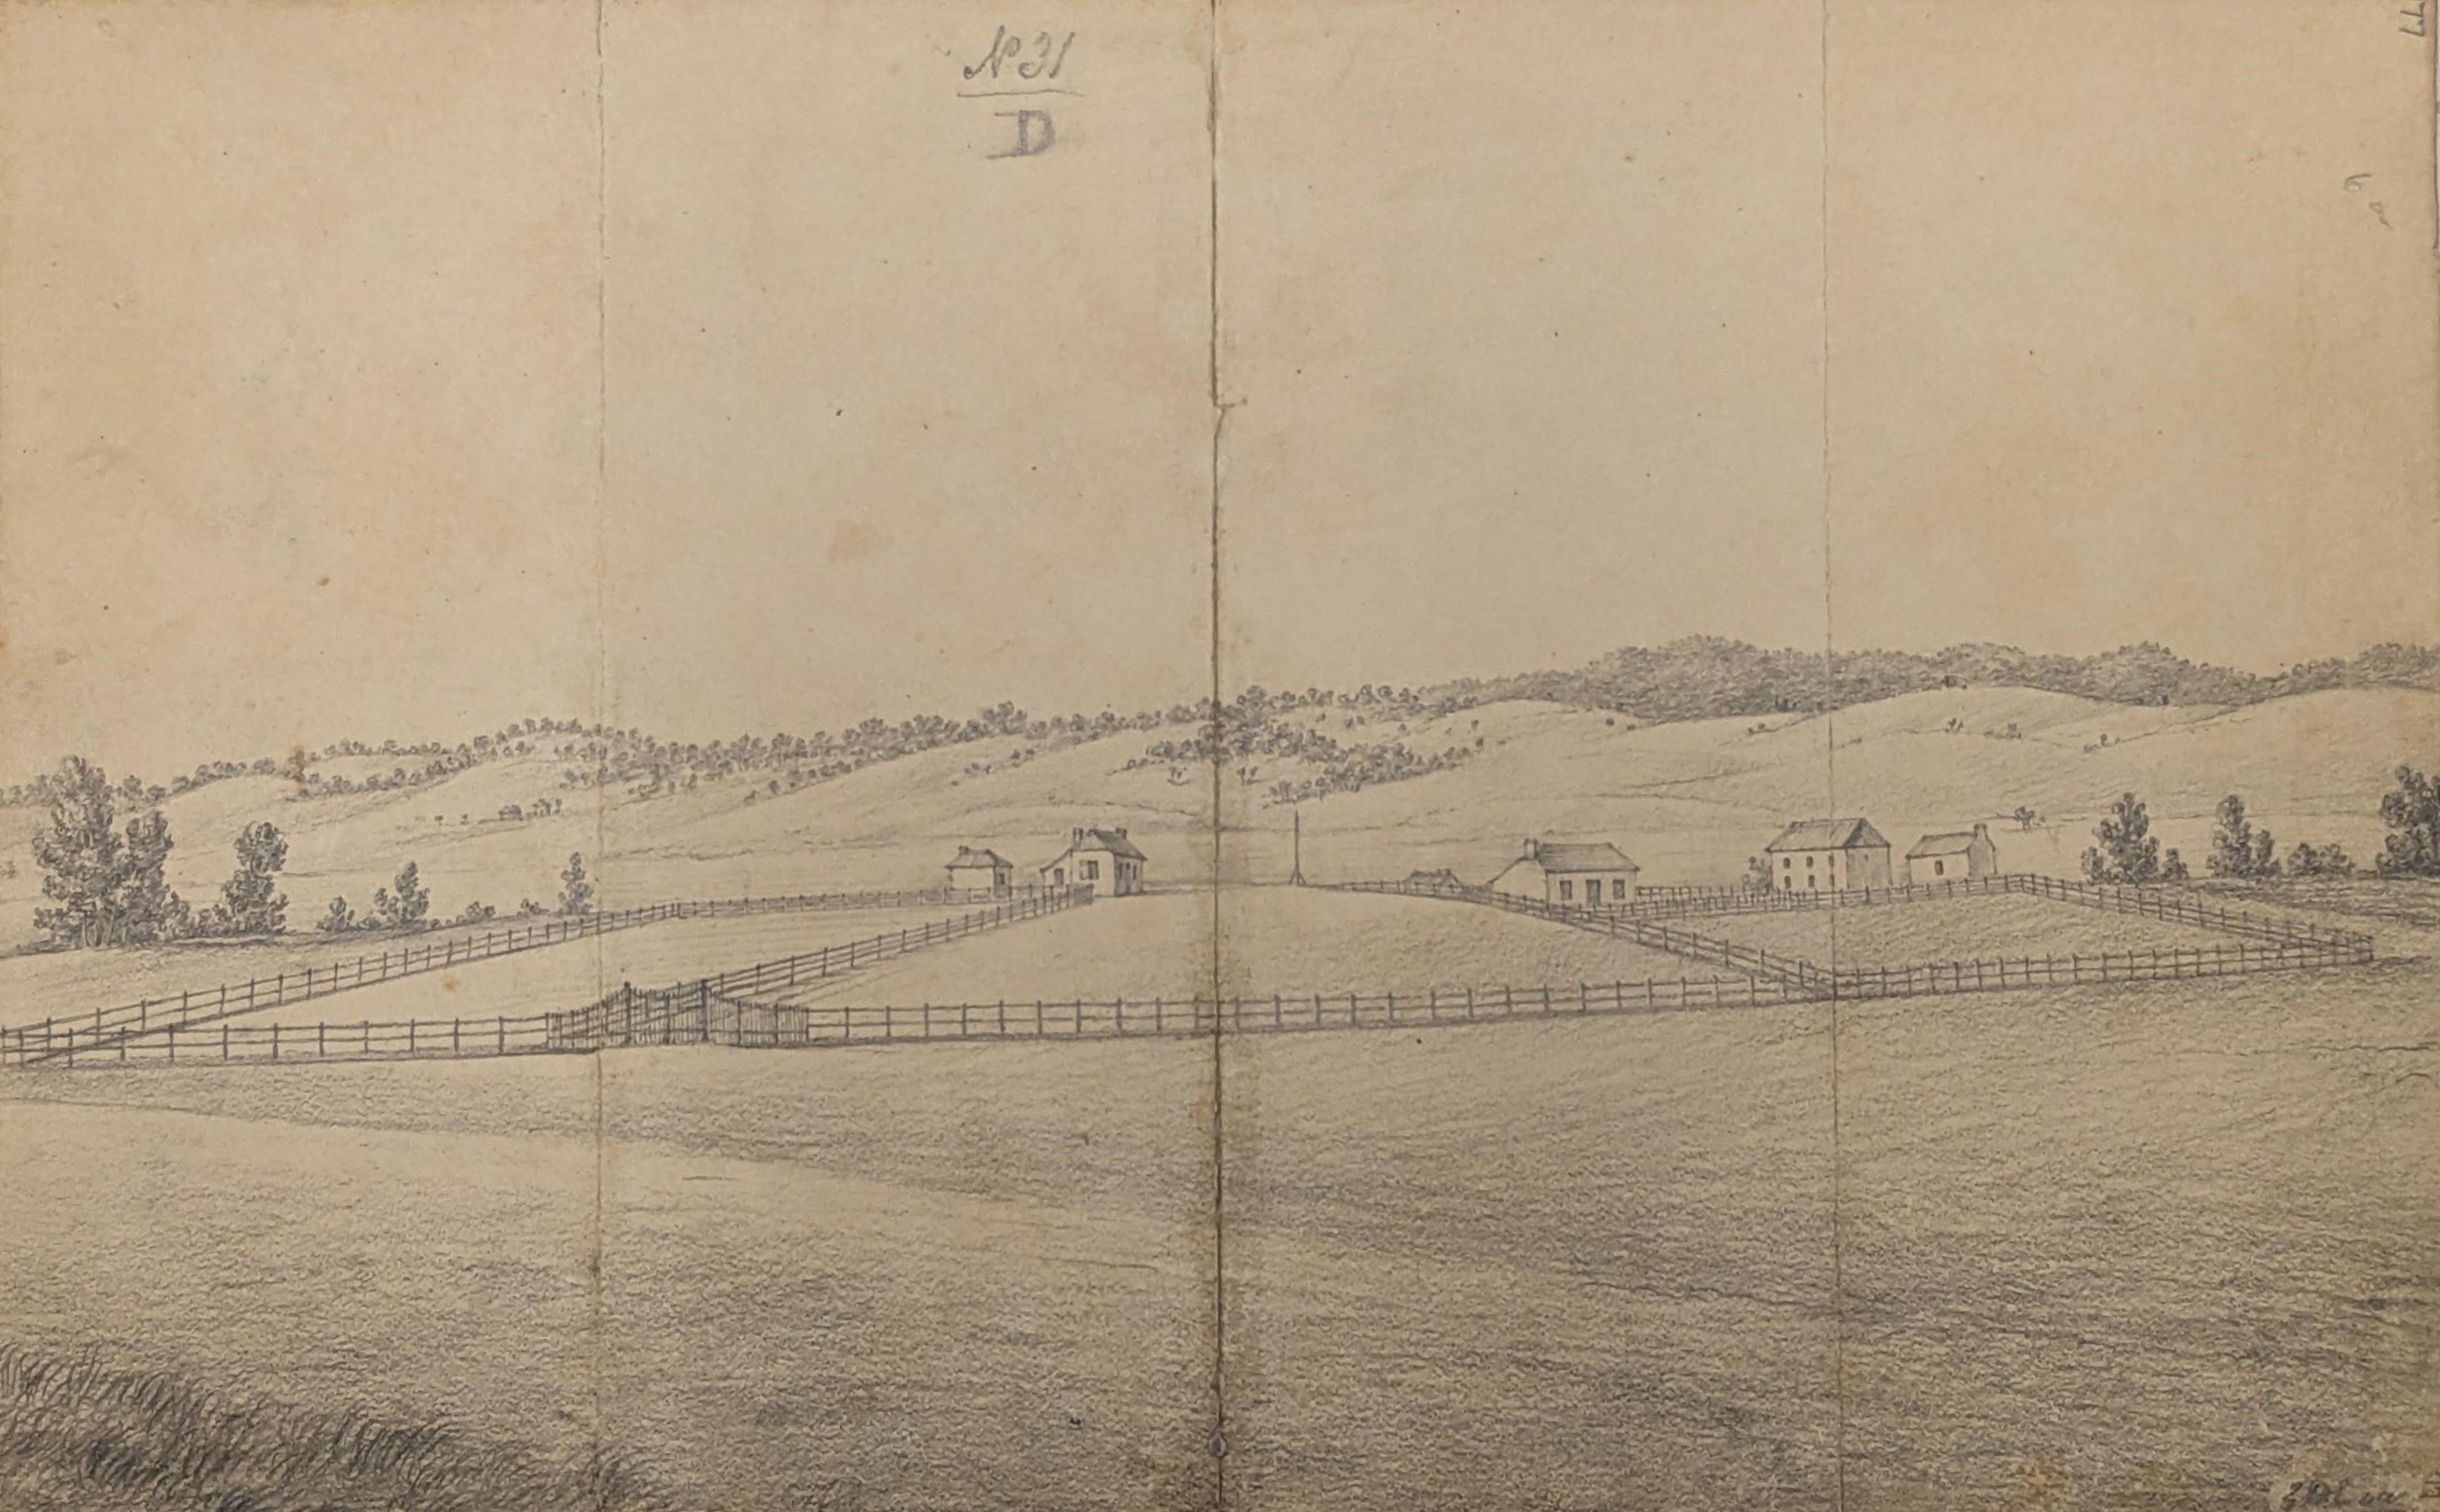 Sketch of a rural setting with farm houses and fenced paddocks